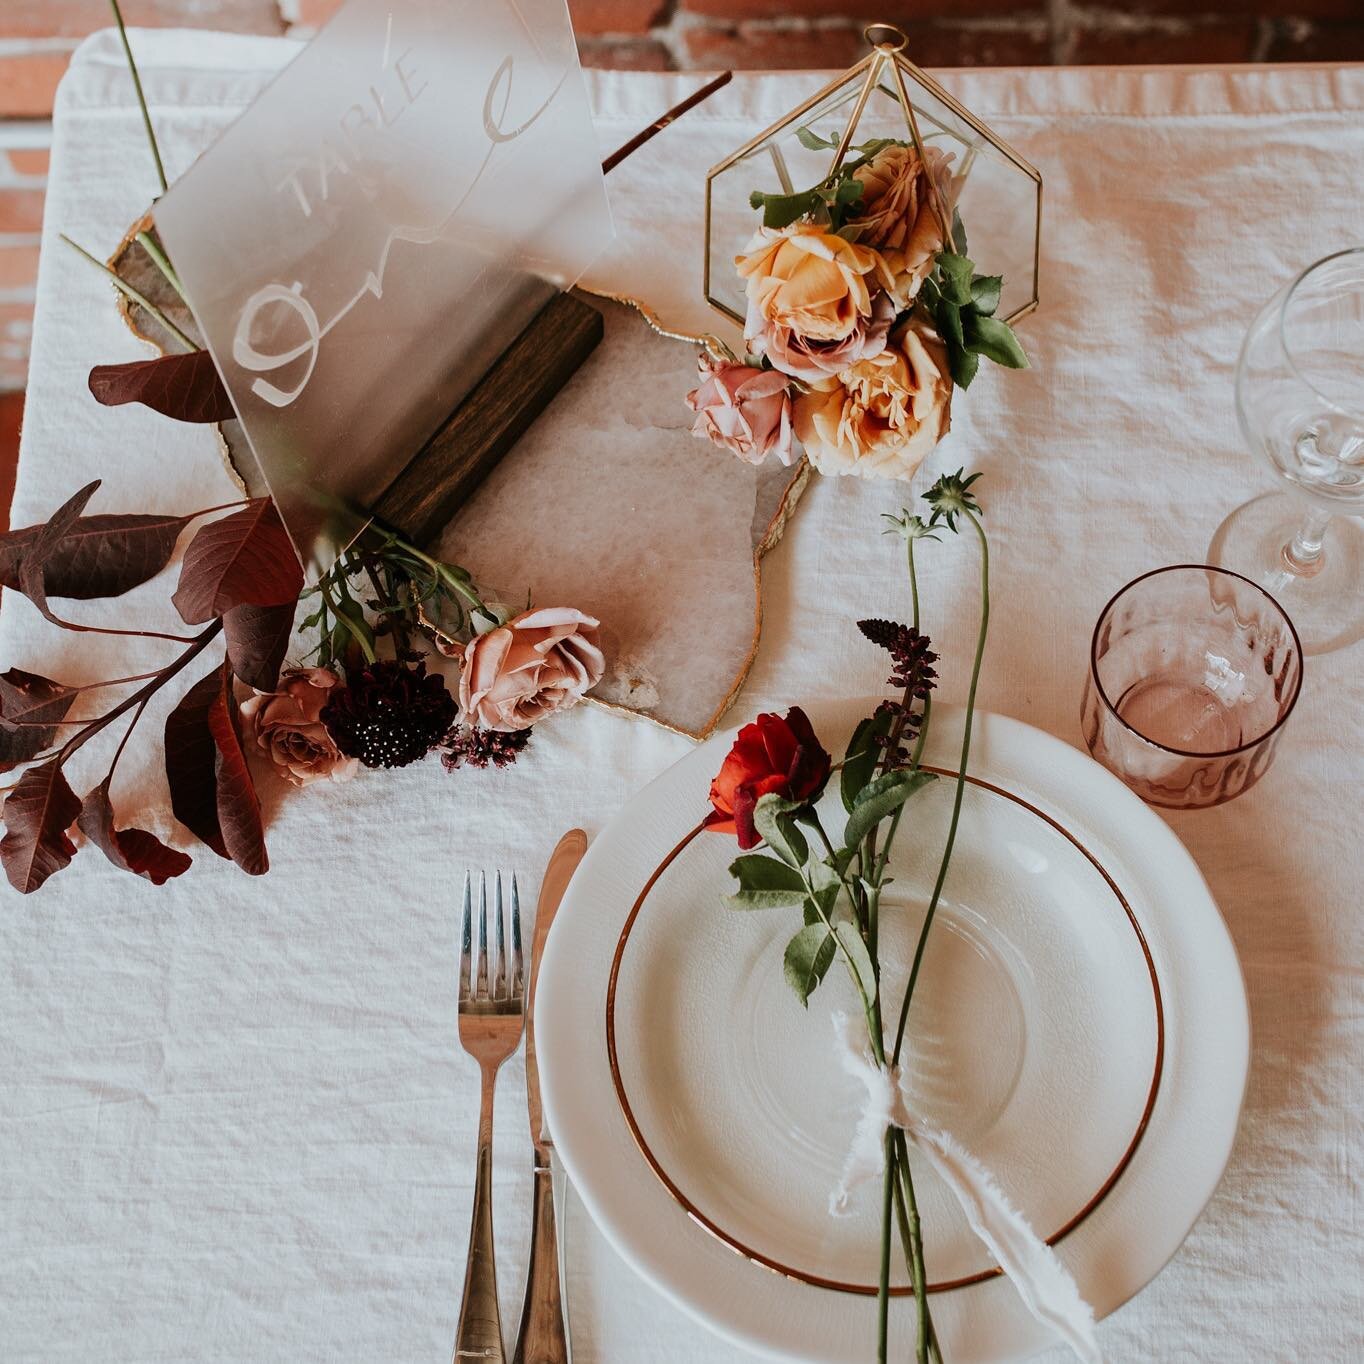 Table elements for that intimate setting. Mondays kicking off just right.
Remember to have a play with your table setting- ideally if you can do a mock-up before that would be great. Play with colours, patterns, textures and even mix it up a bit with